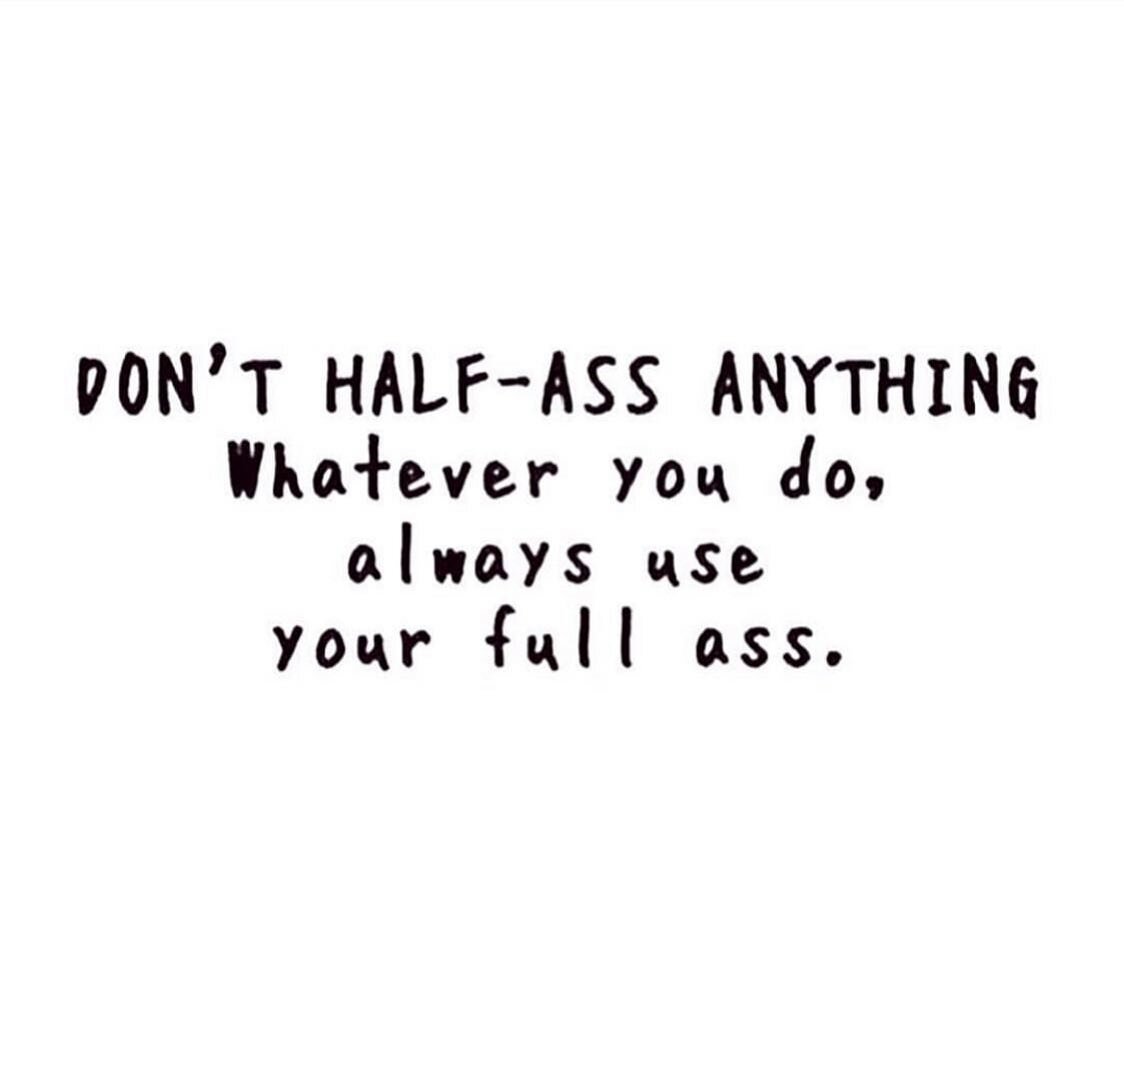 Advice worth reposting 😄✌🏽💗 Happy weekend to everyone! ☀️☀️#donthalfassanything #donthalfassit #lifeadvice